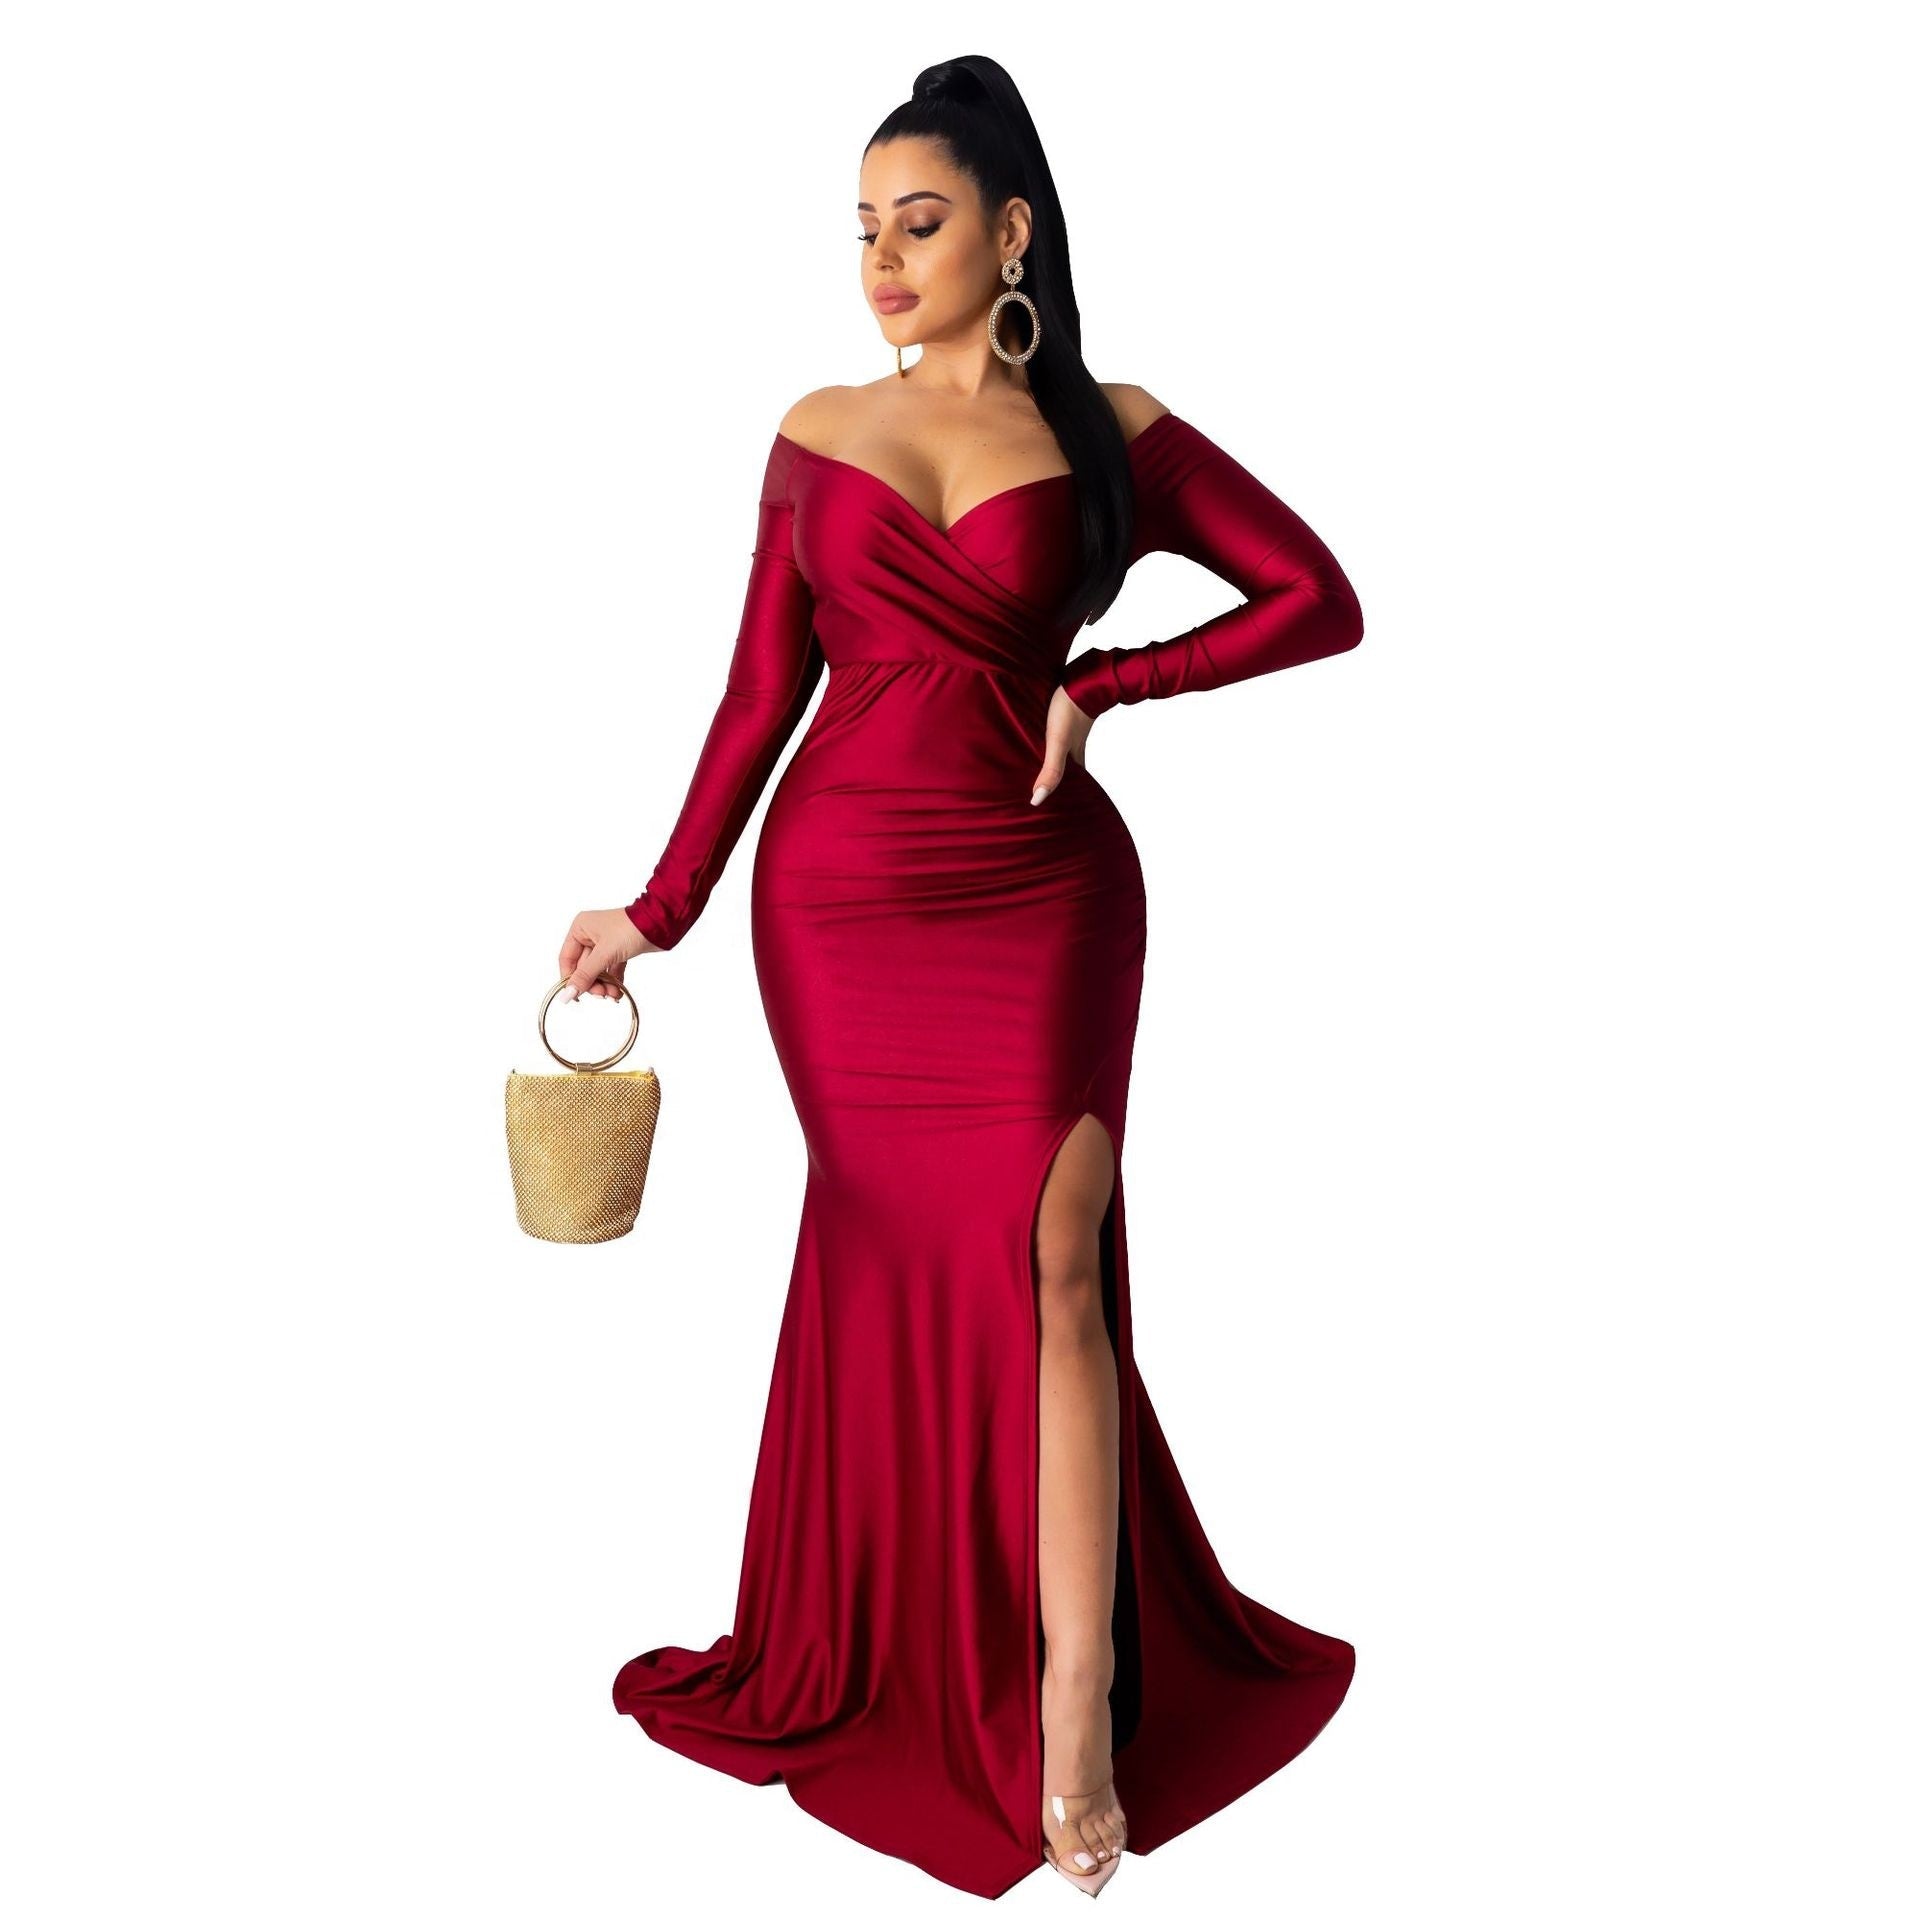 Sexy Nightclub Maxi Dress V-Neck Solid Color Long Sleeves Big Long Slit Dress Party Evening Dress baby magazin 